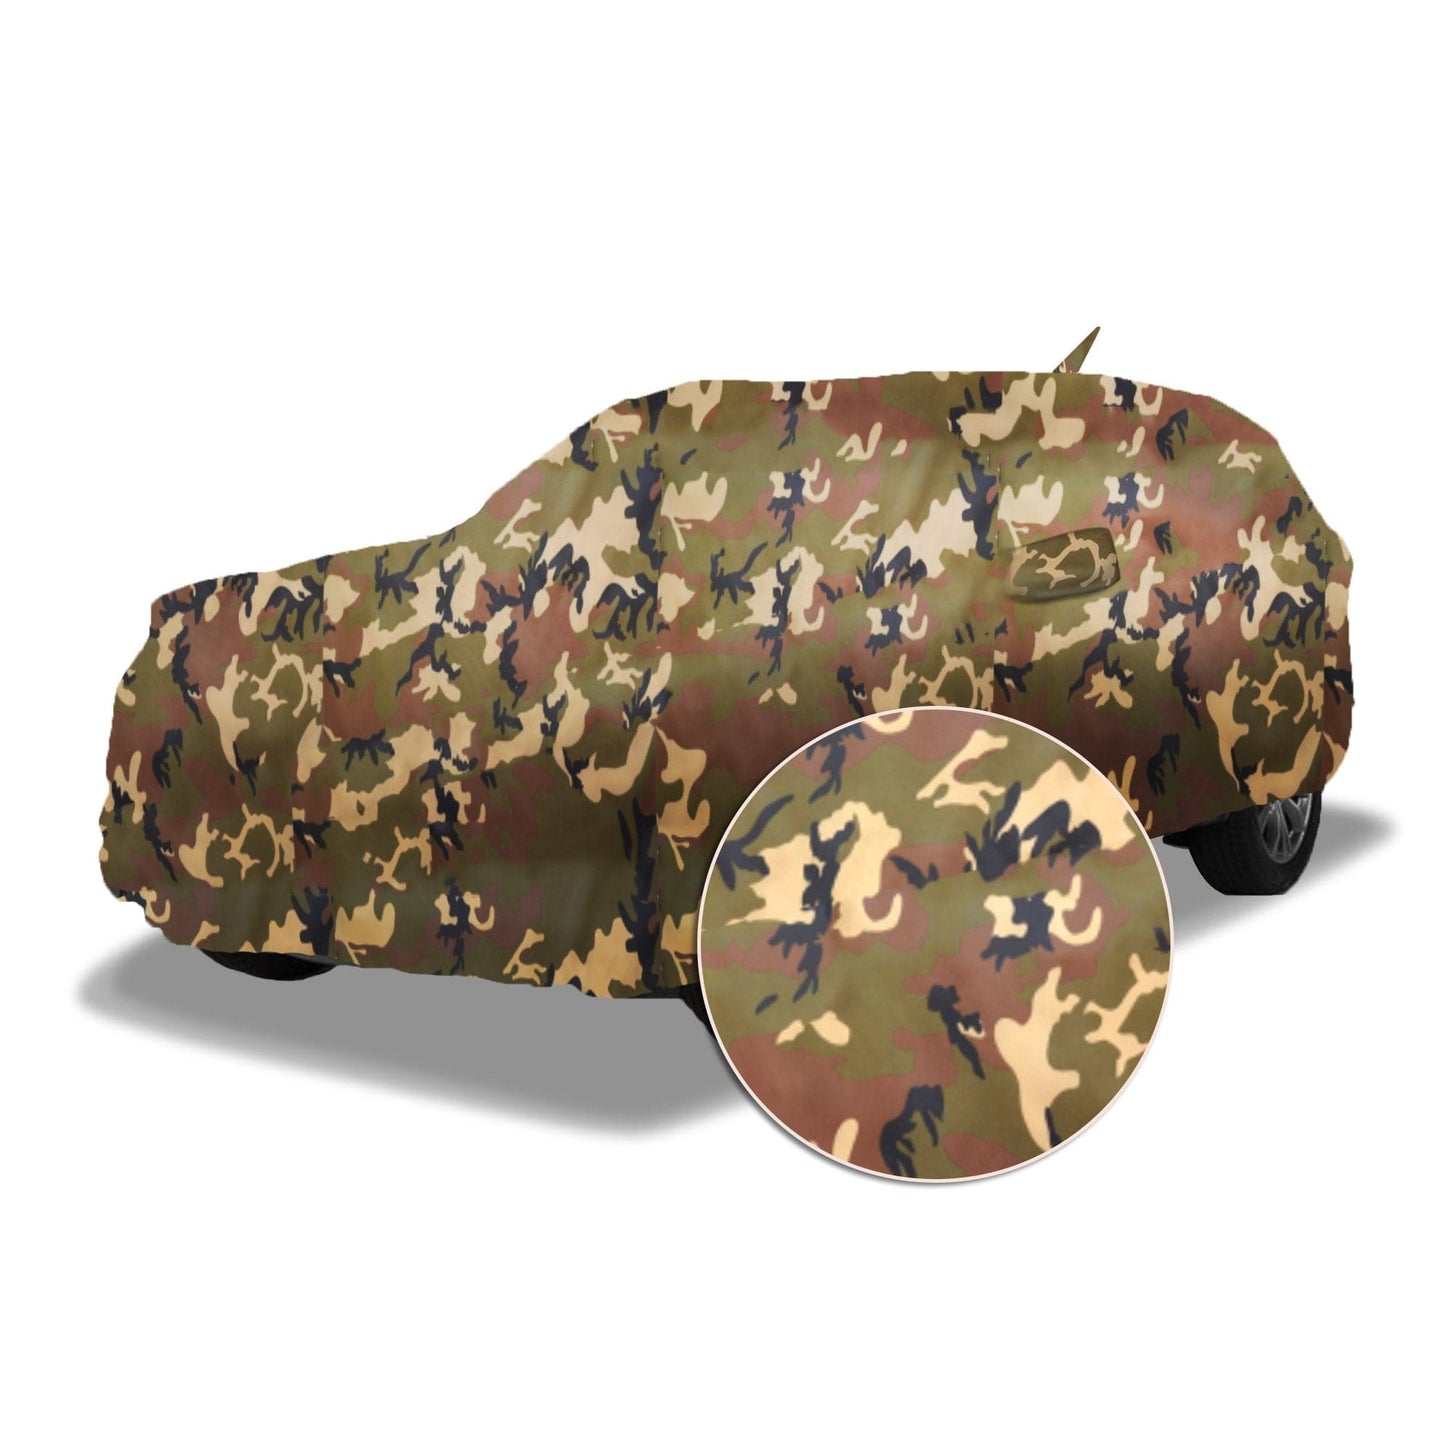 Ascot Maruti Suzuki Alto K10 Car Body Cover Extra Strong & Dust Proof Jungle Military Car Cover with UV Proof & Water-Resistant Coating